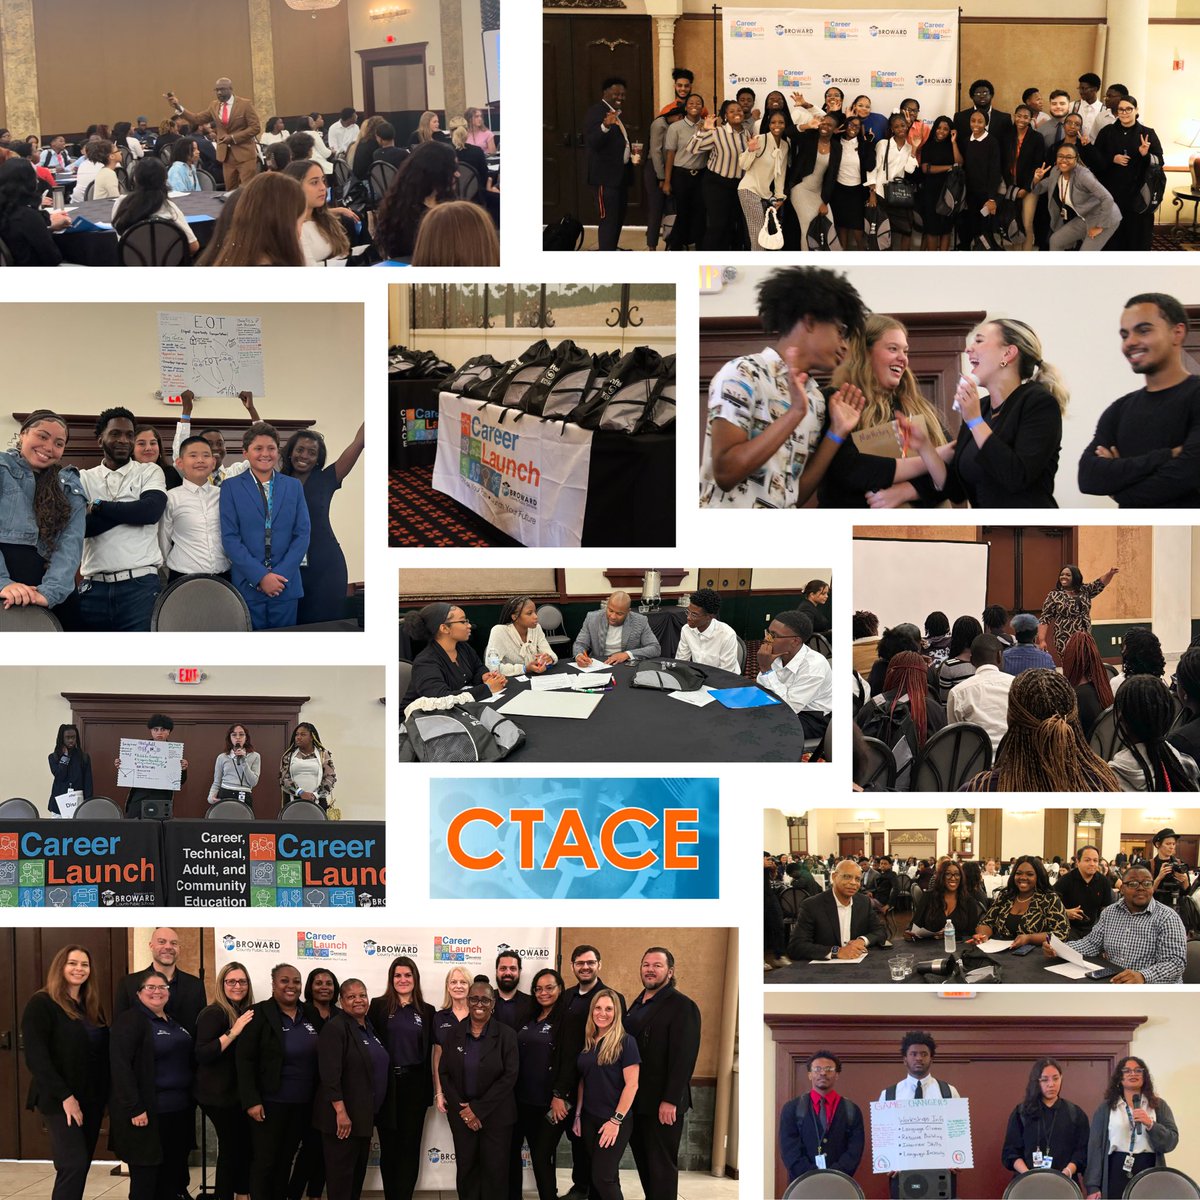 The First Annual Broward Leadership & Innovation Student Summit (BLISS) empowered students to own their future! Speakers, breakouts, coaching, pitching ideas, finalists, and crowning the winners of Margate MS the “Trailblazers!” @browardschools @NFTE @VEInternational  @MrHardge1